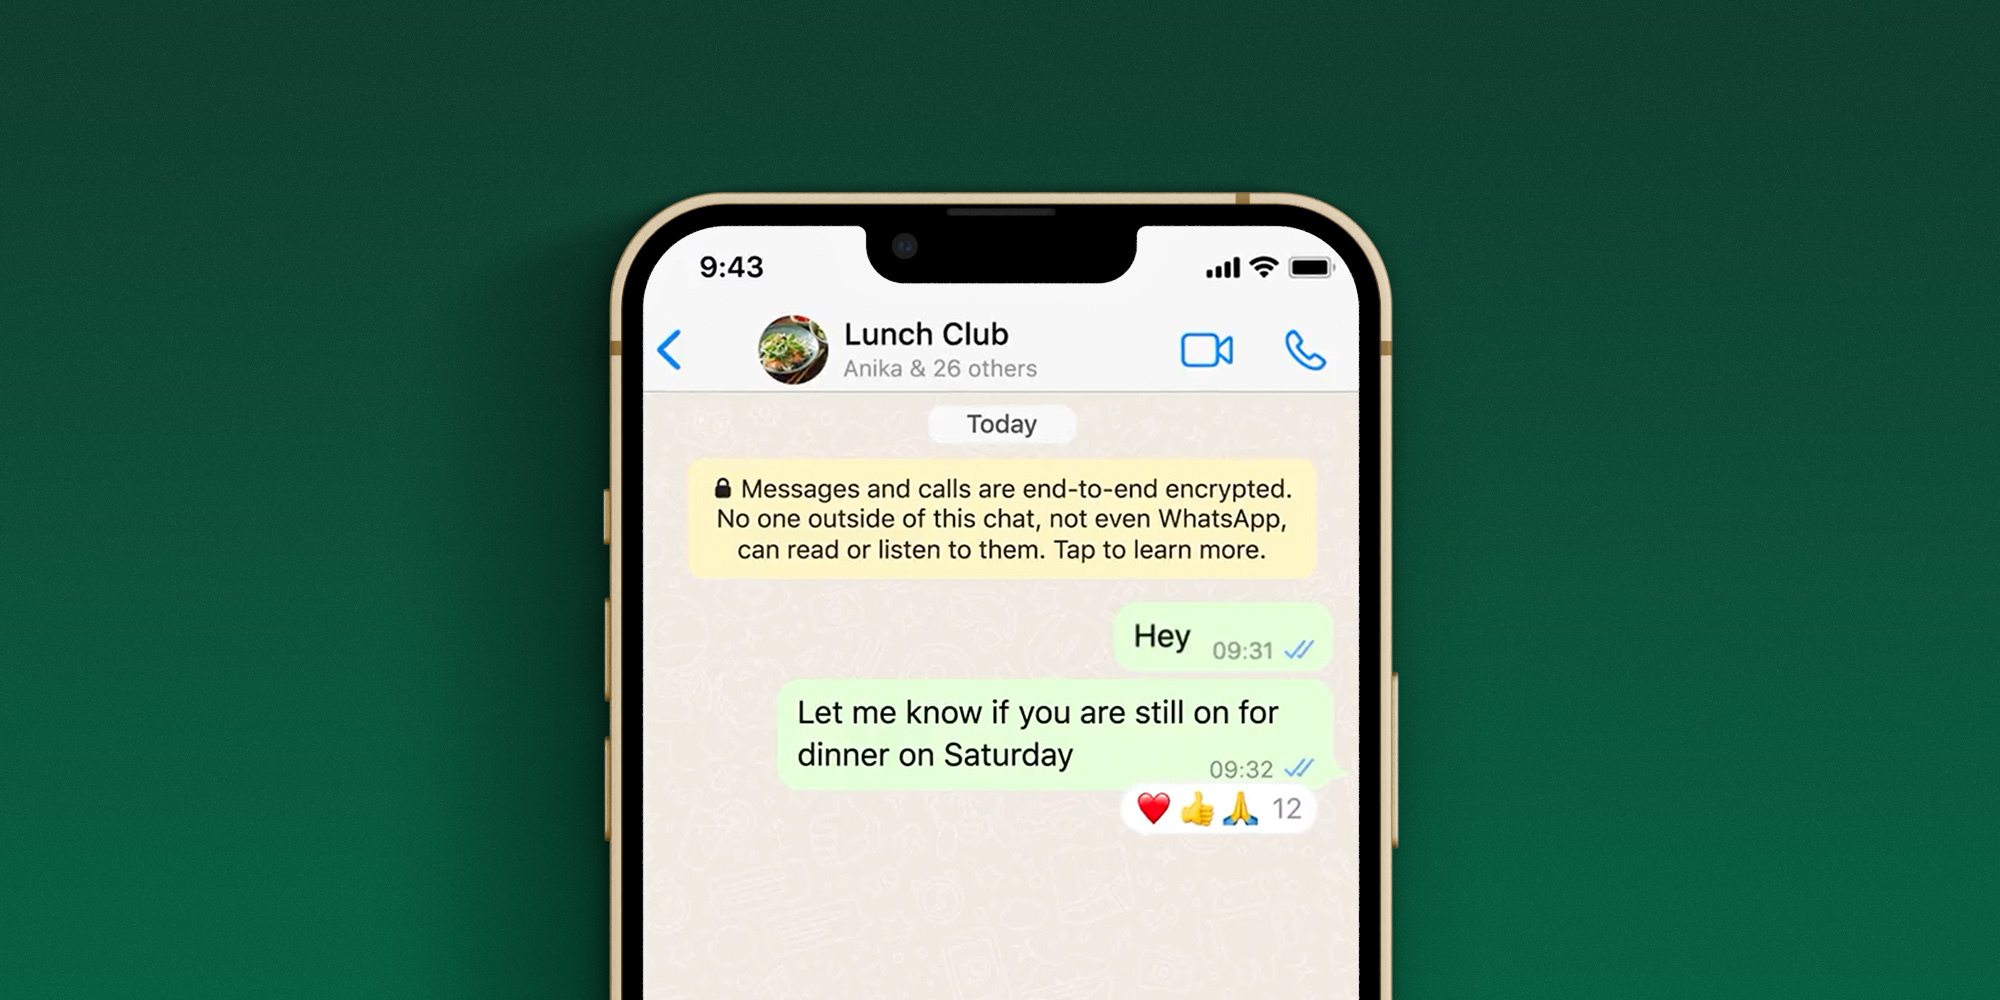 WhatsApp announces long-awaited Reactions and Community features - 9to5Mac